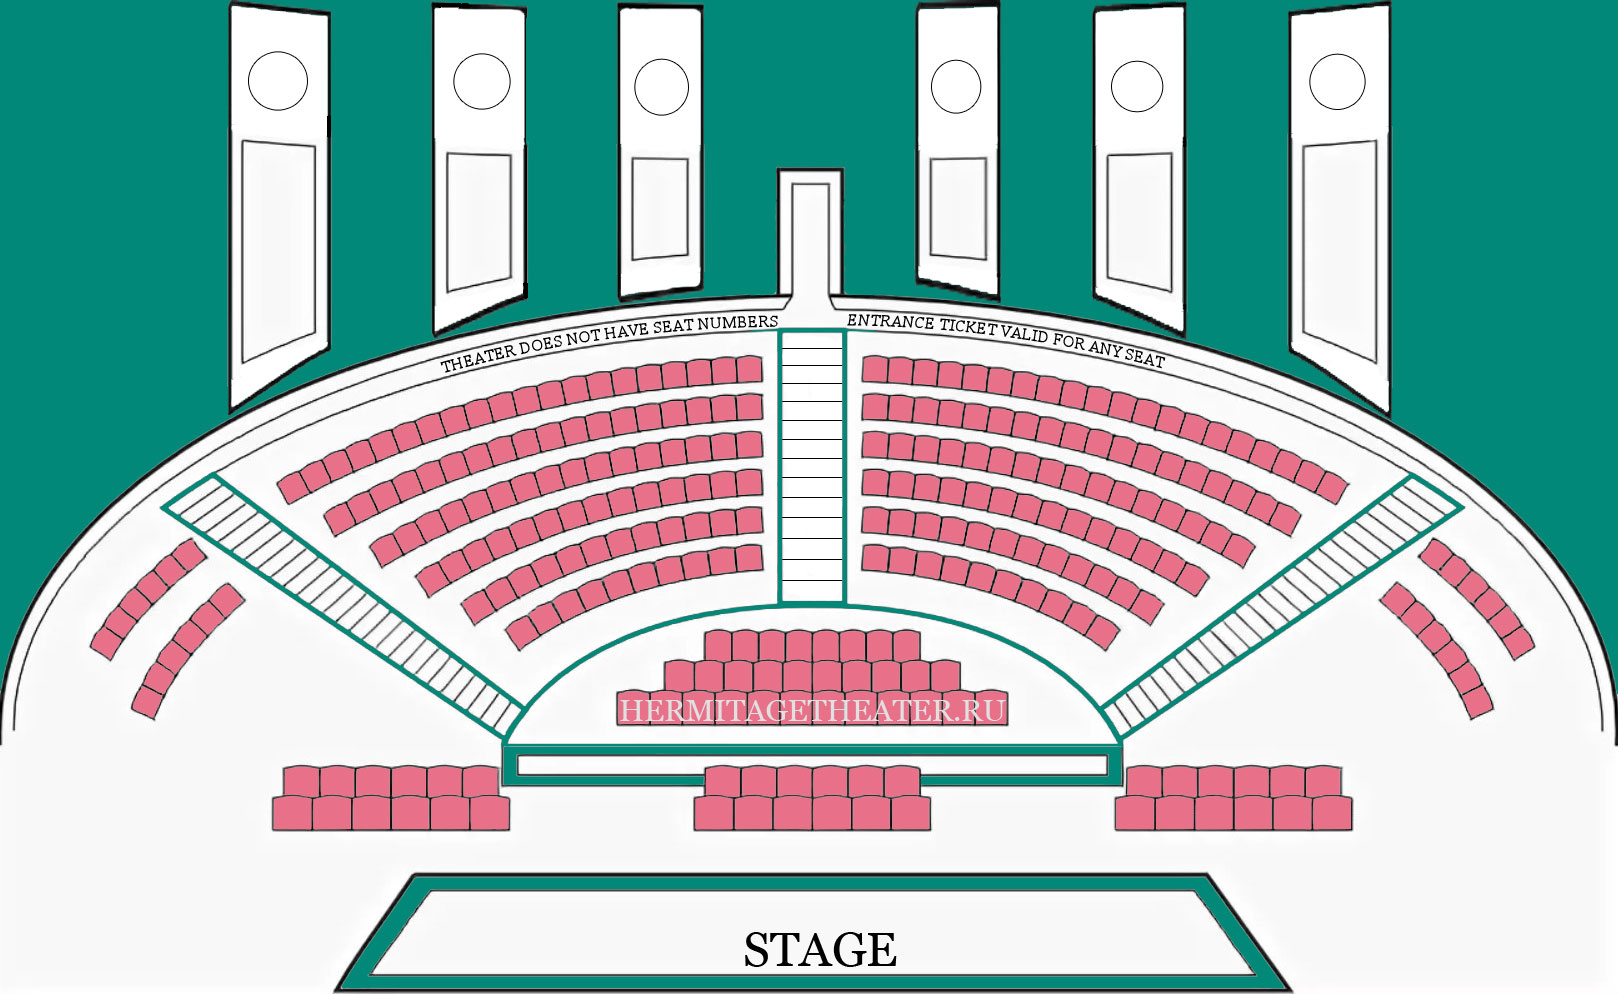 Seating plan of the Hermitage Theater